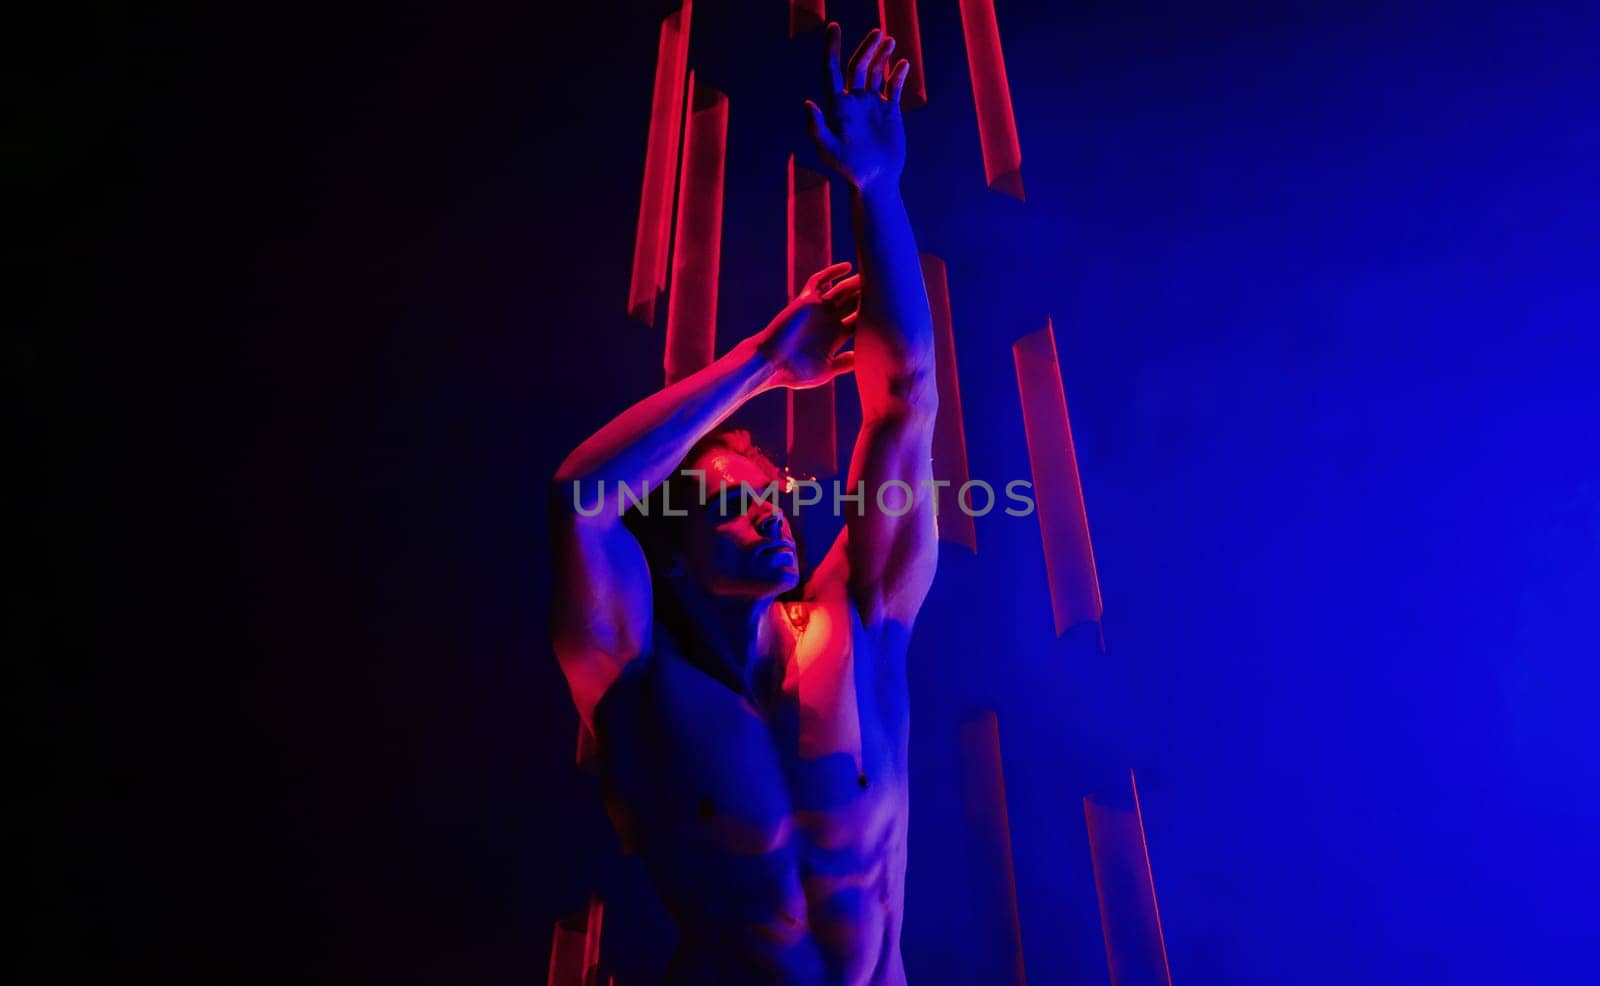 Sporty handsome man with long hair, naked torso abs portrait under colorful illumination, laser light, neon smoke club. Projection illusion mapping. Futuristic model.